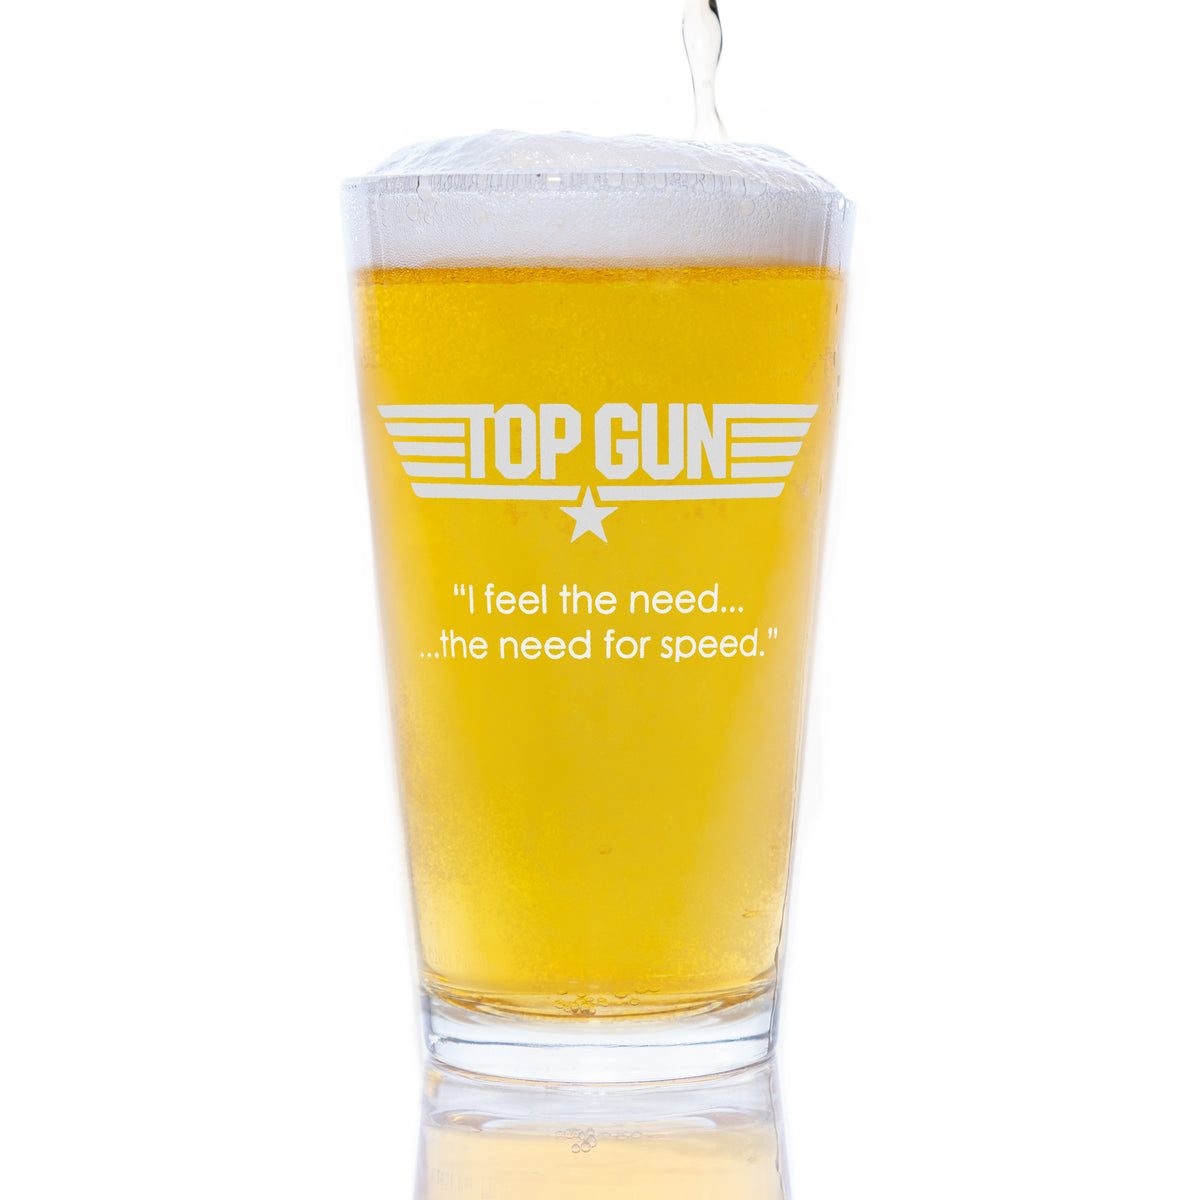 Etched Top Gun Pint Glass with Quote "I feel the need... the need for speed"